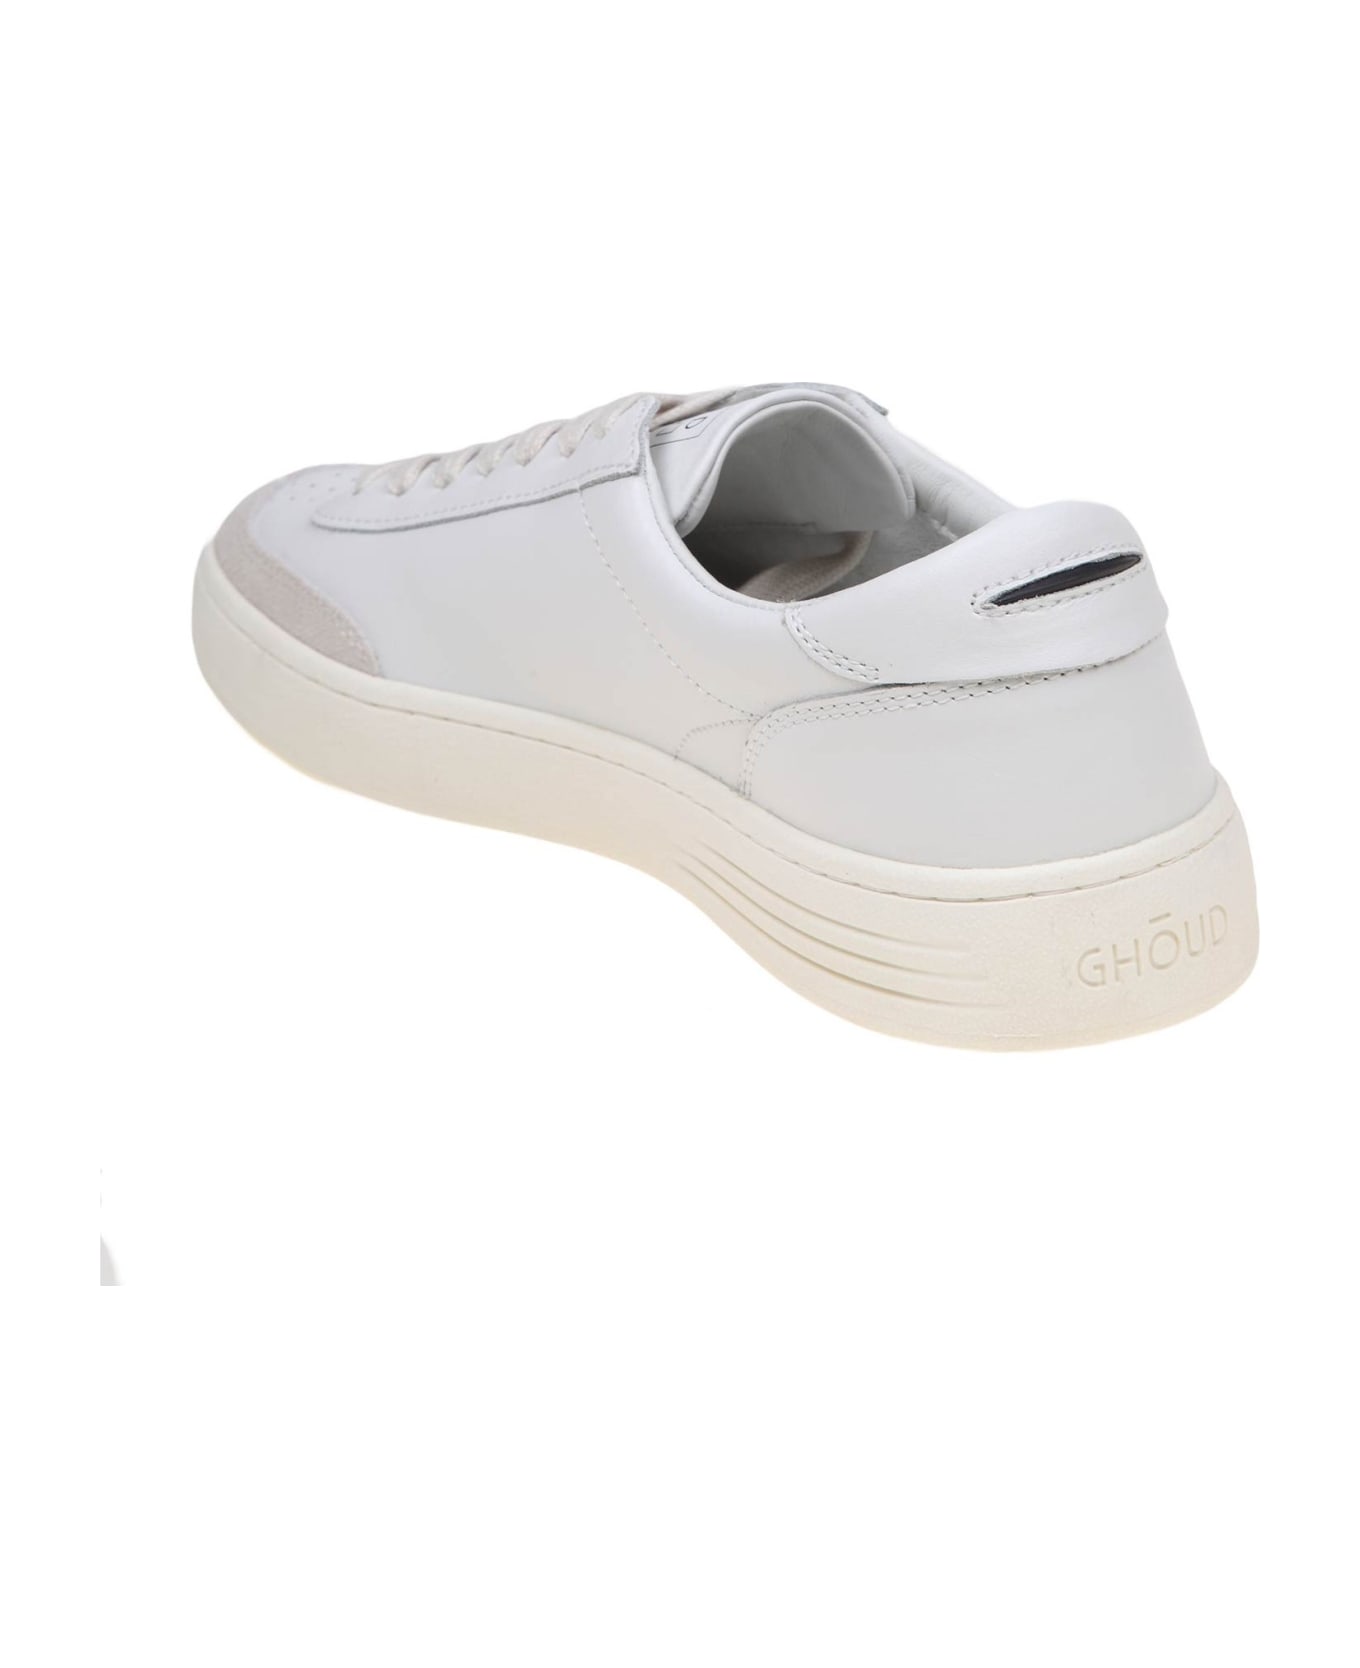 GHOUD Lido Low Sneakers In White Leather And Suede - LEAT/SUEDE WHITE